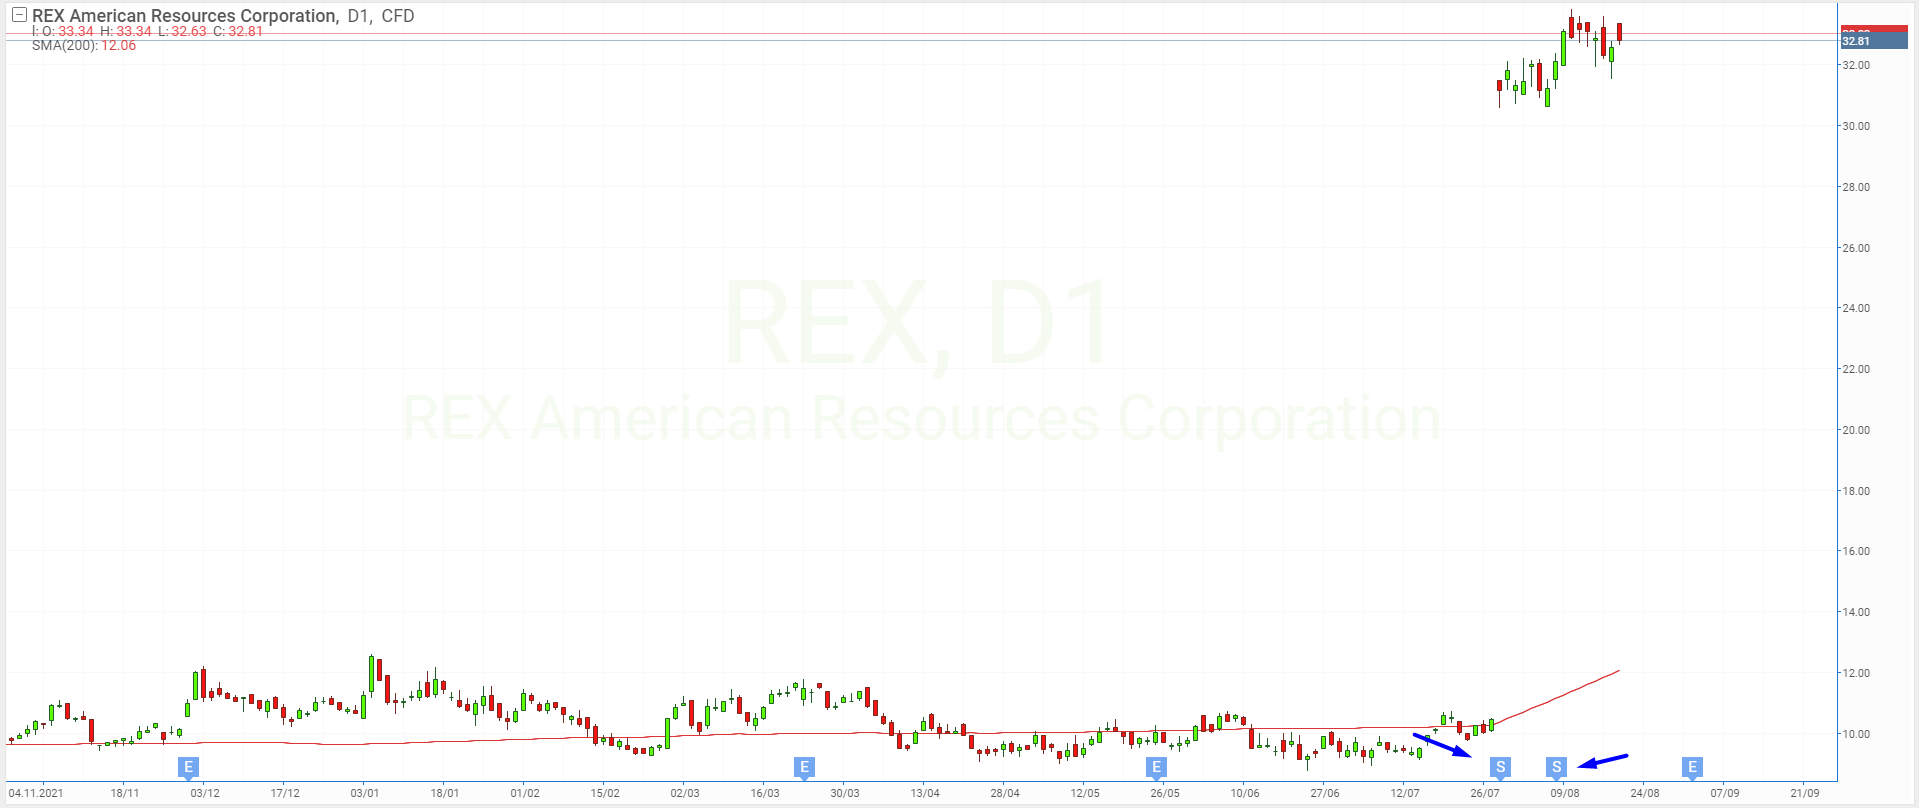 Reverse stock split of REX American Resources shares